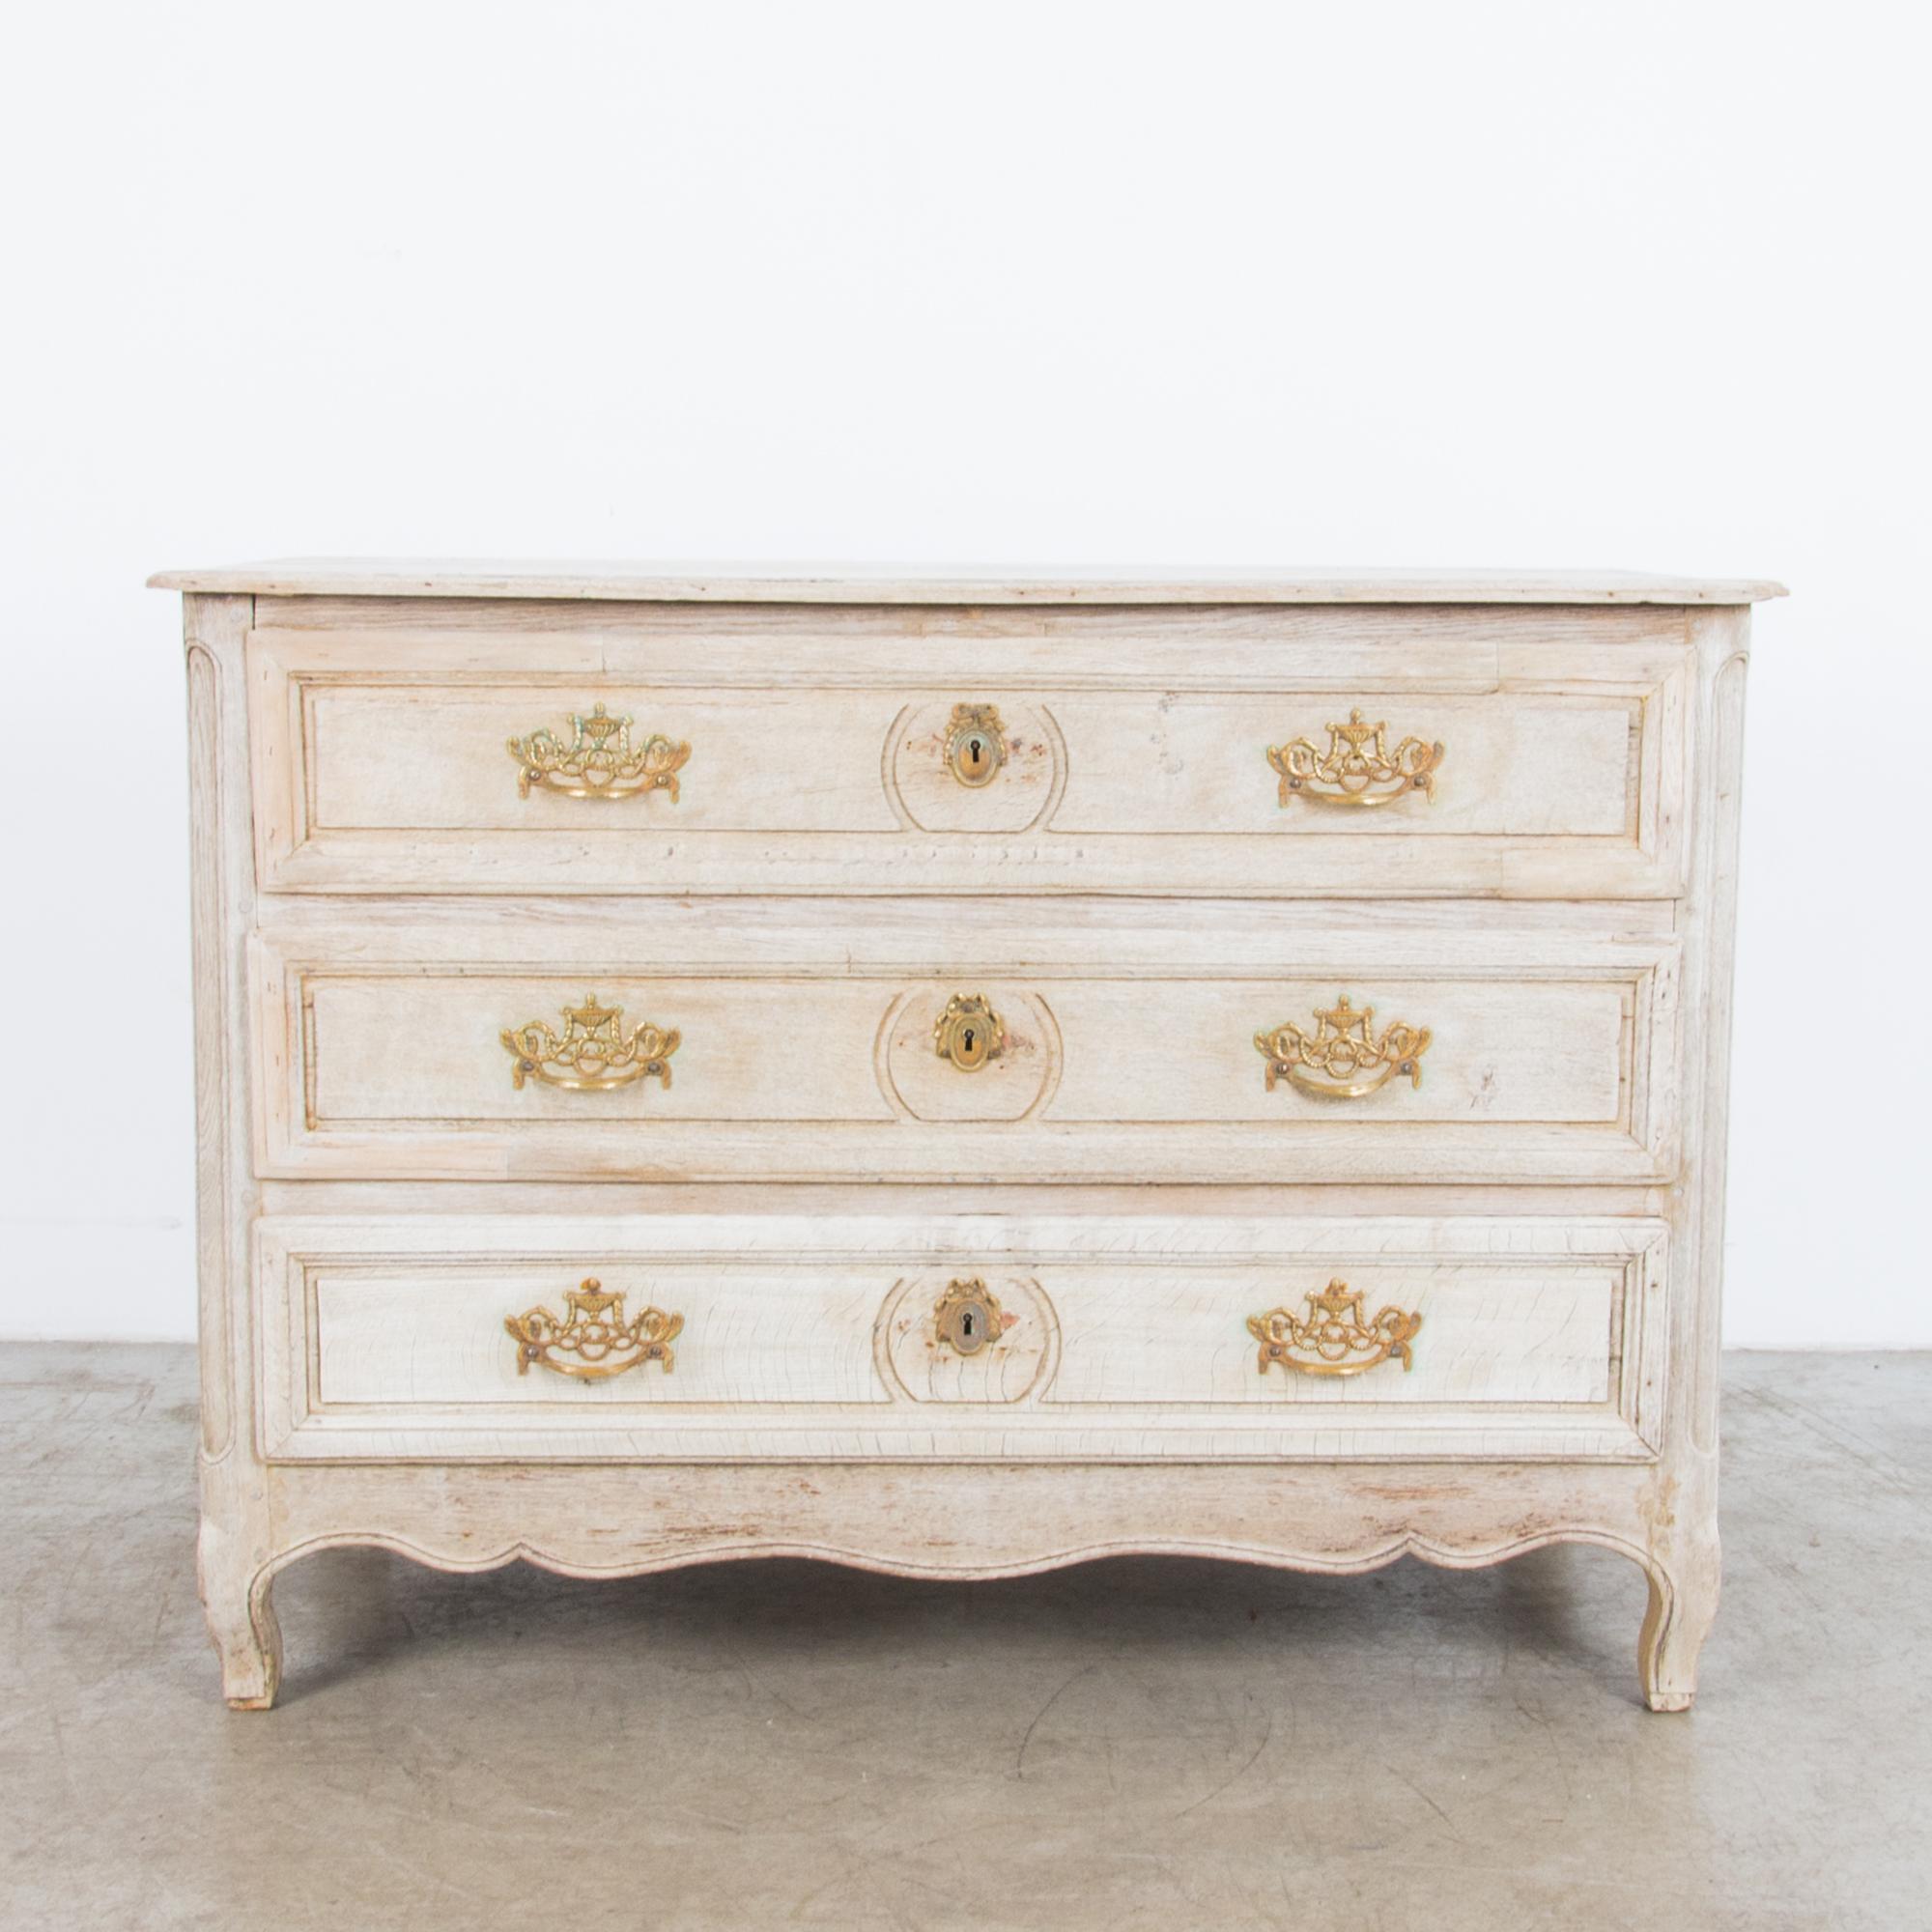 This antique chest of drawers from 1880s France is made of oak, restored and refinished for a bright contemporary effect. It features a gently Rococo silhouette and three pull-out drawers bearing elaborate gilded lock-pieces and drawer handles. The